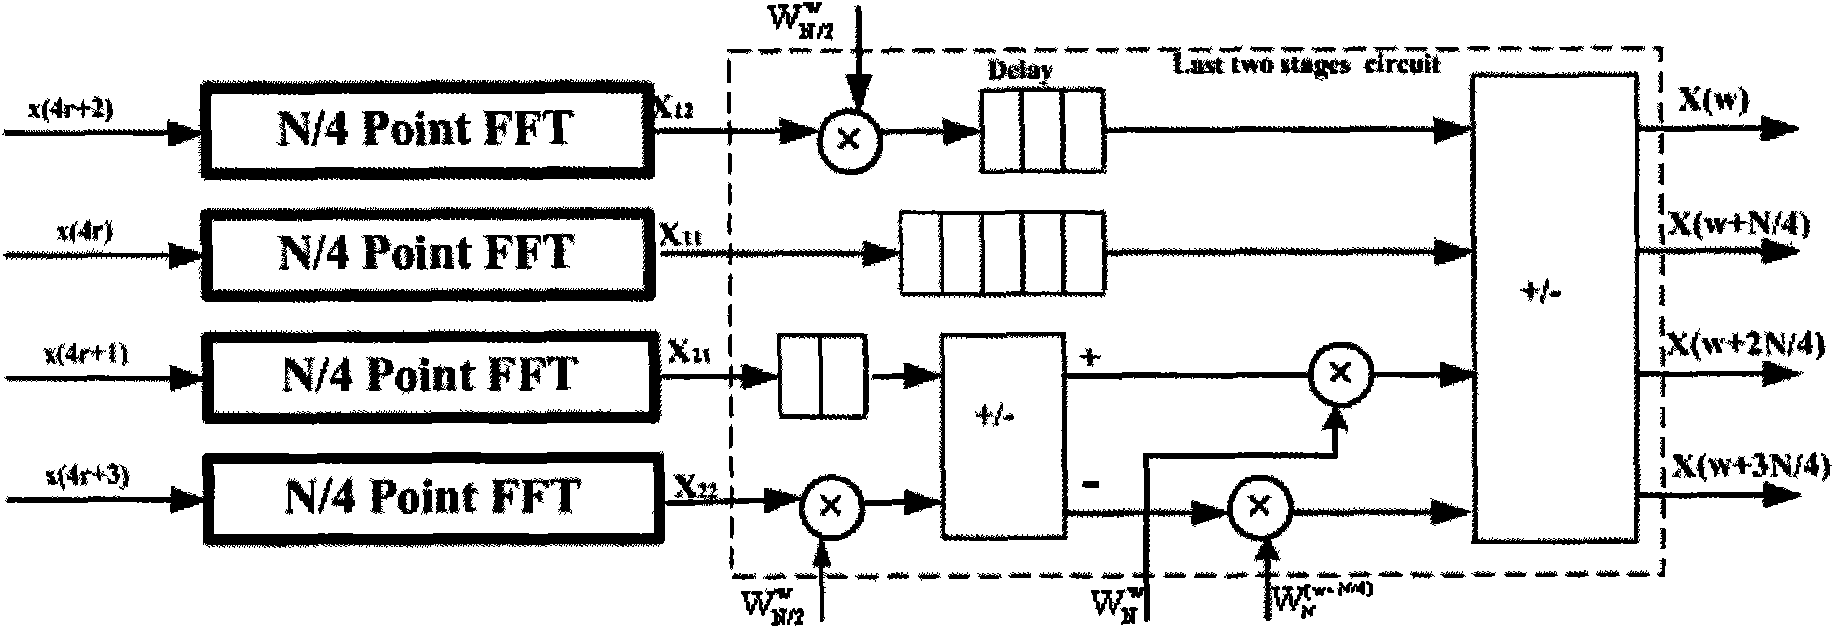 Method of realizing parallel structure for FFT processor based on FPGA